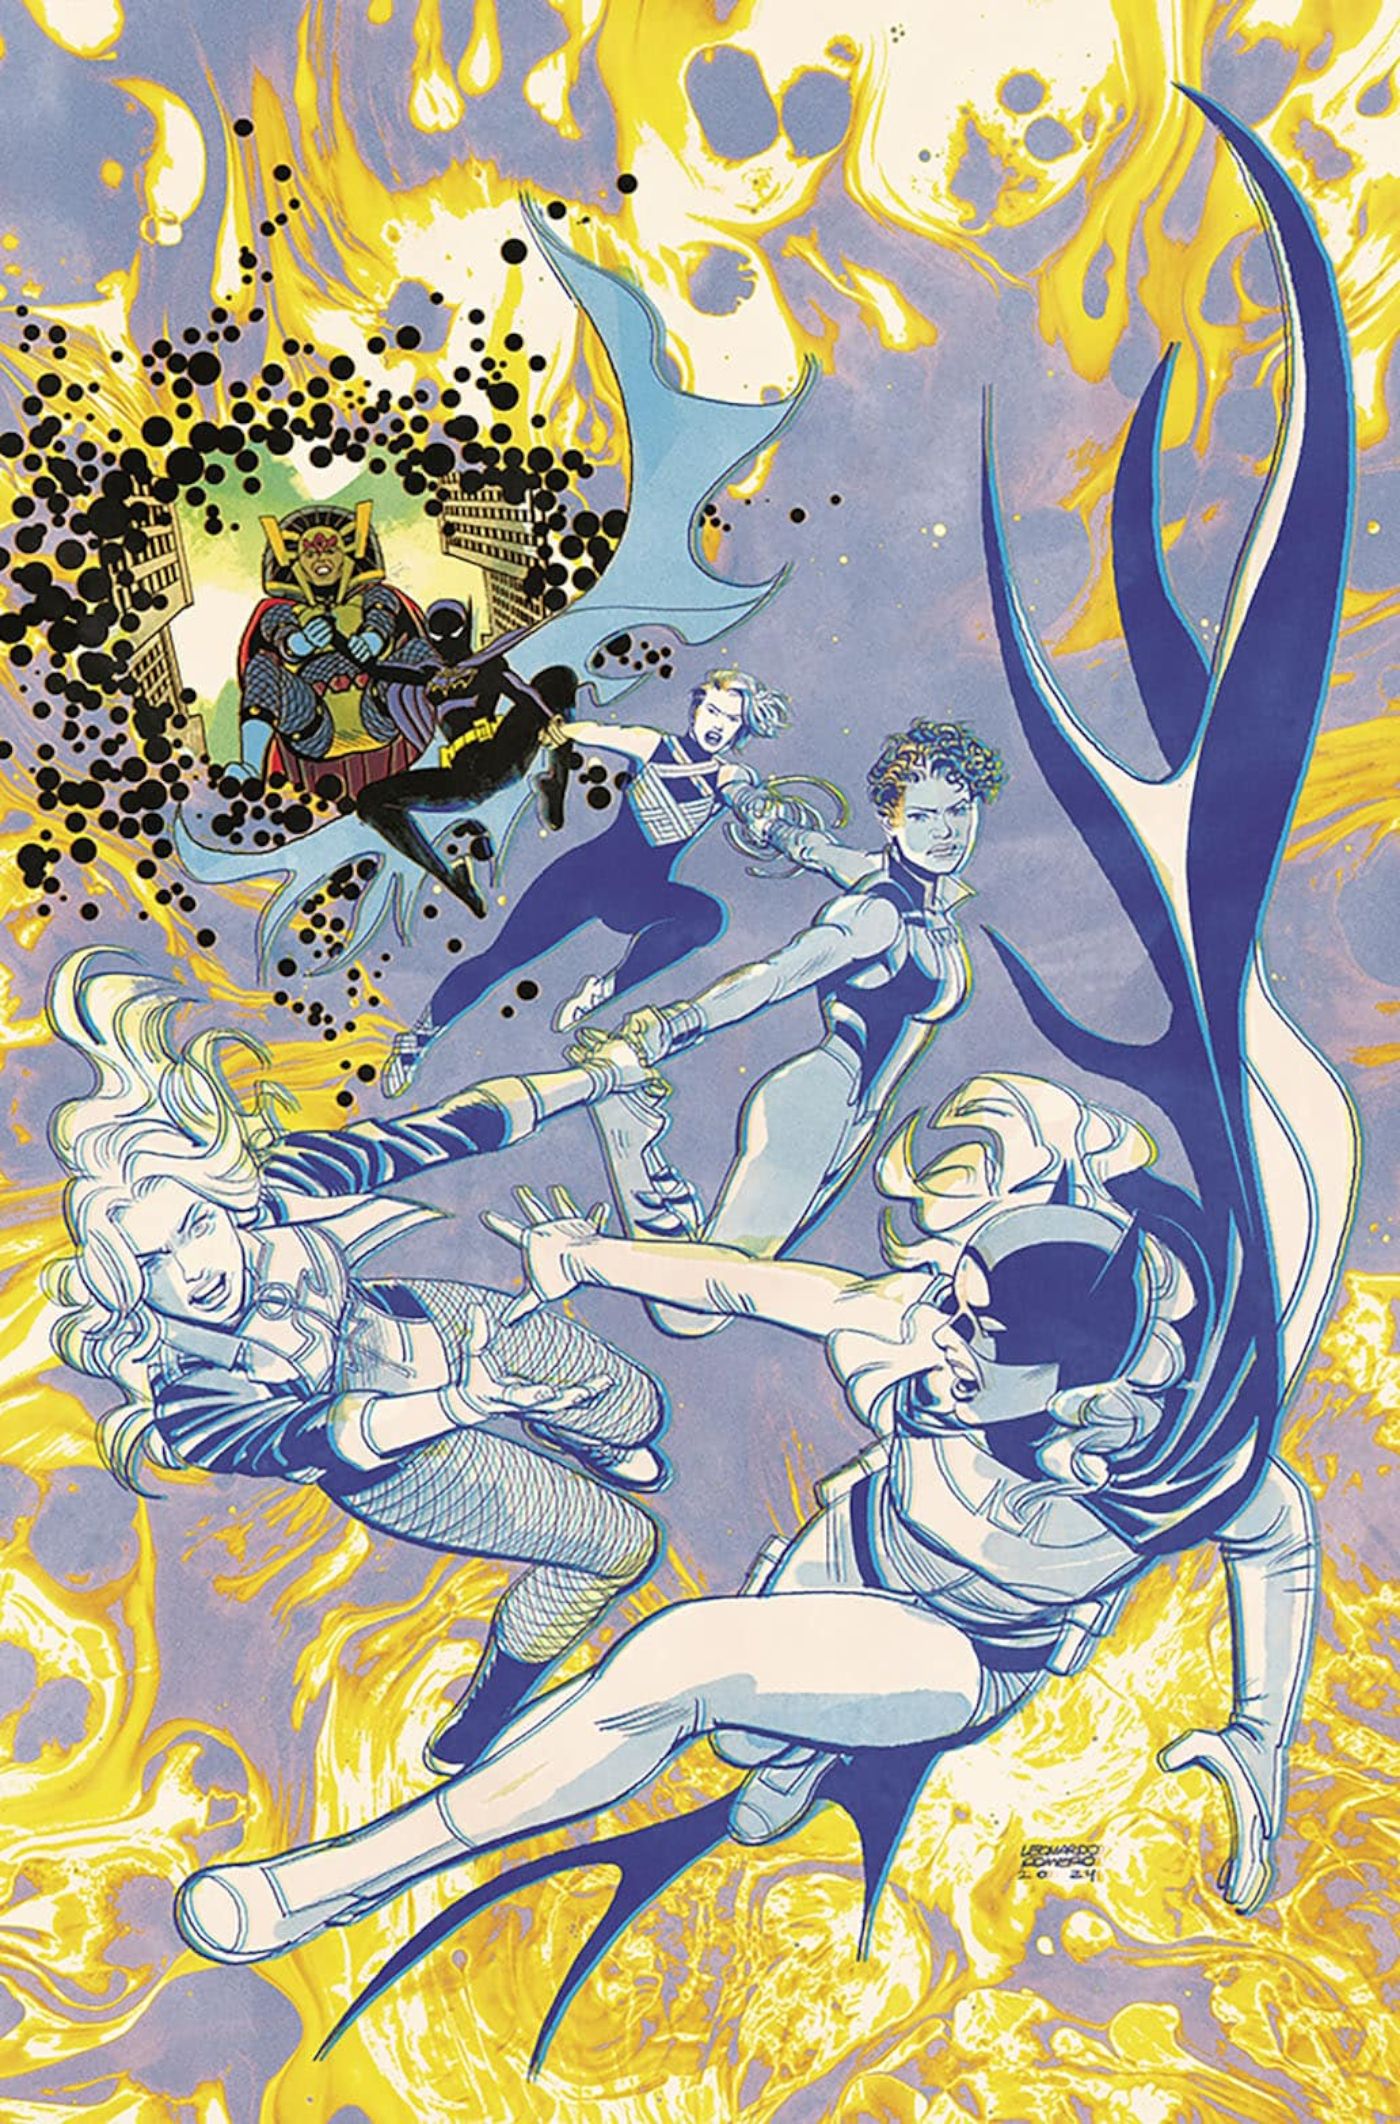 Birds of Prey 9 Main Cover Solicit: Batgirl falling into a strange yellow dimension while the Birds try to save her.